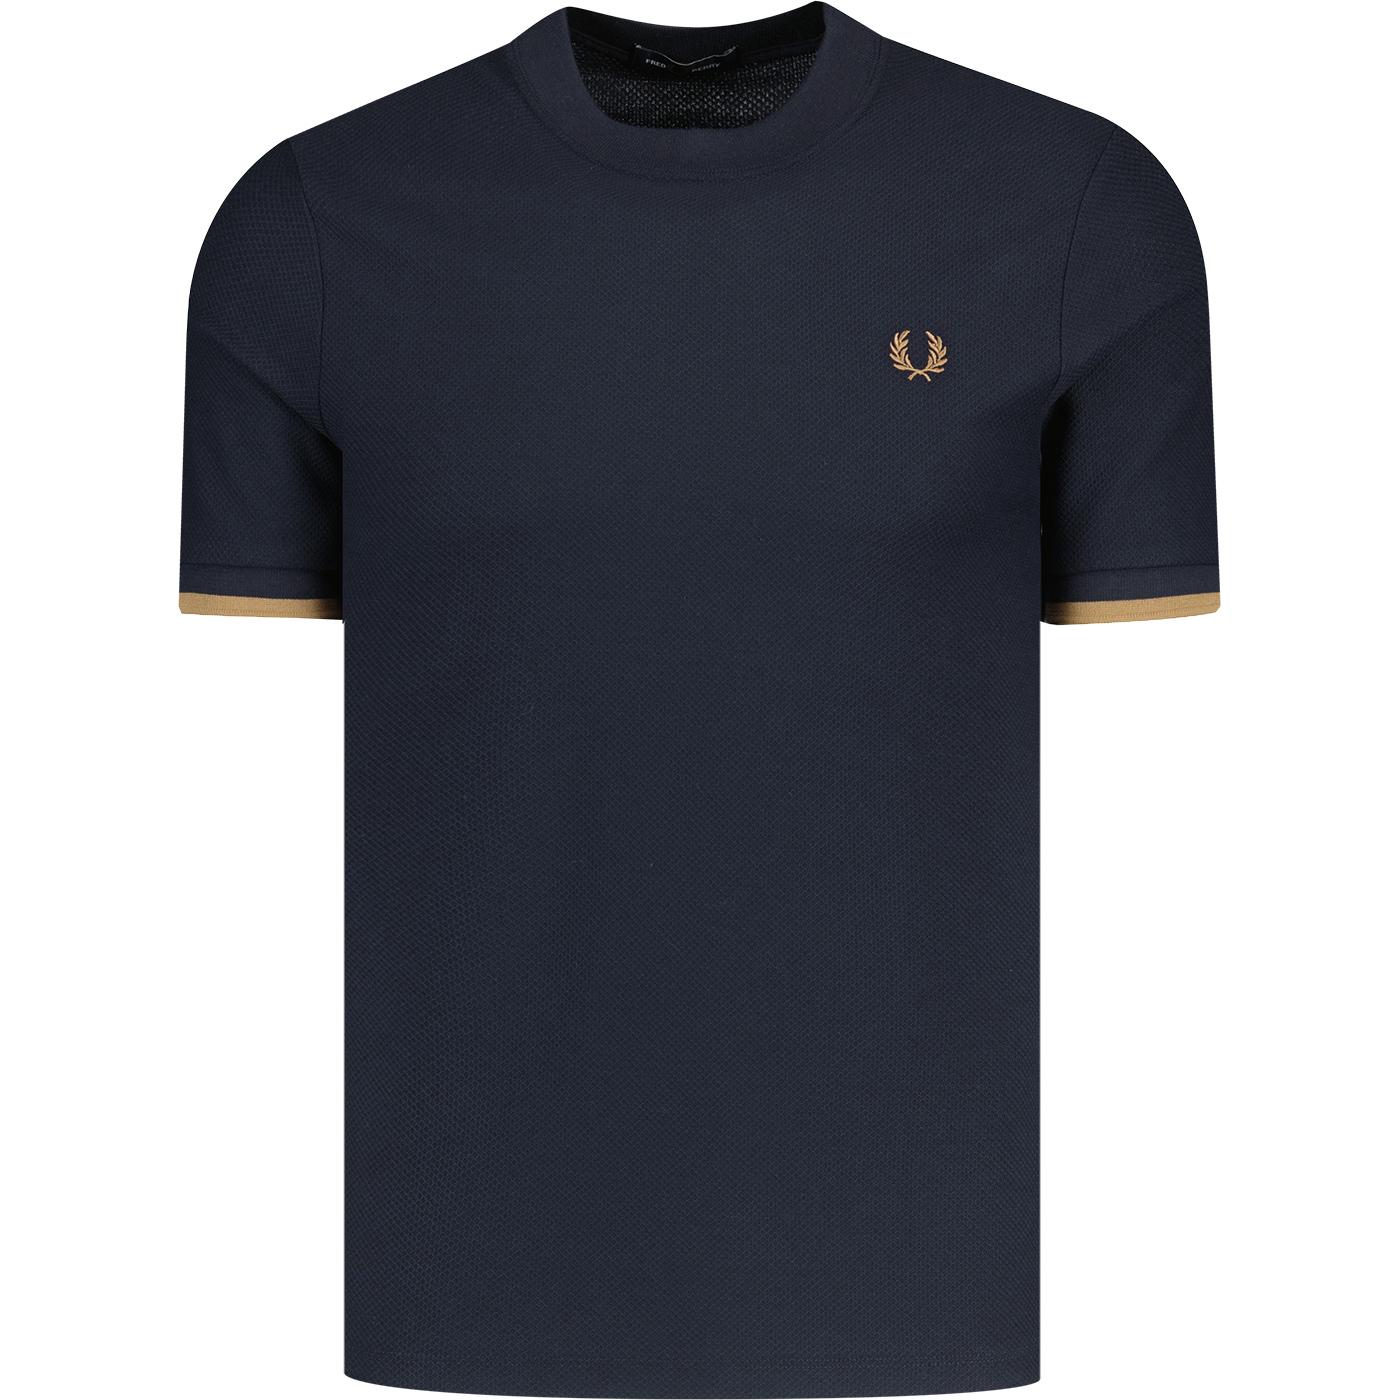 Fred Perry Retro Tipped Cuff Pique T-shirt (Navy)